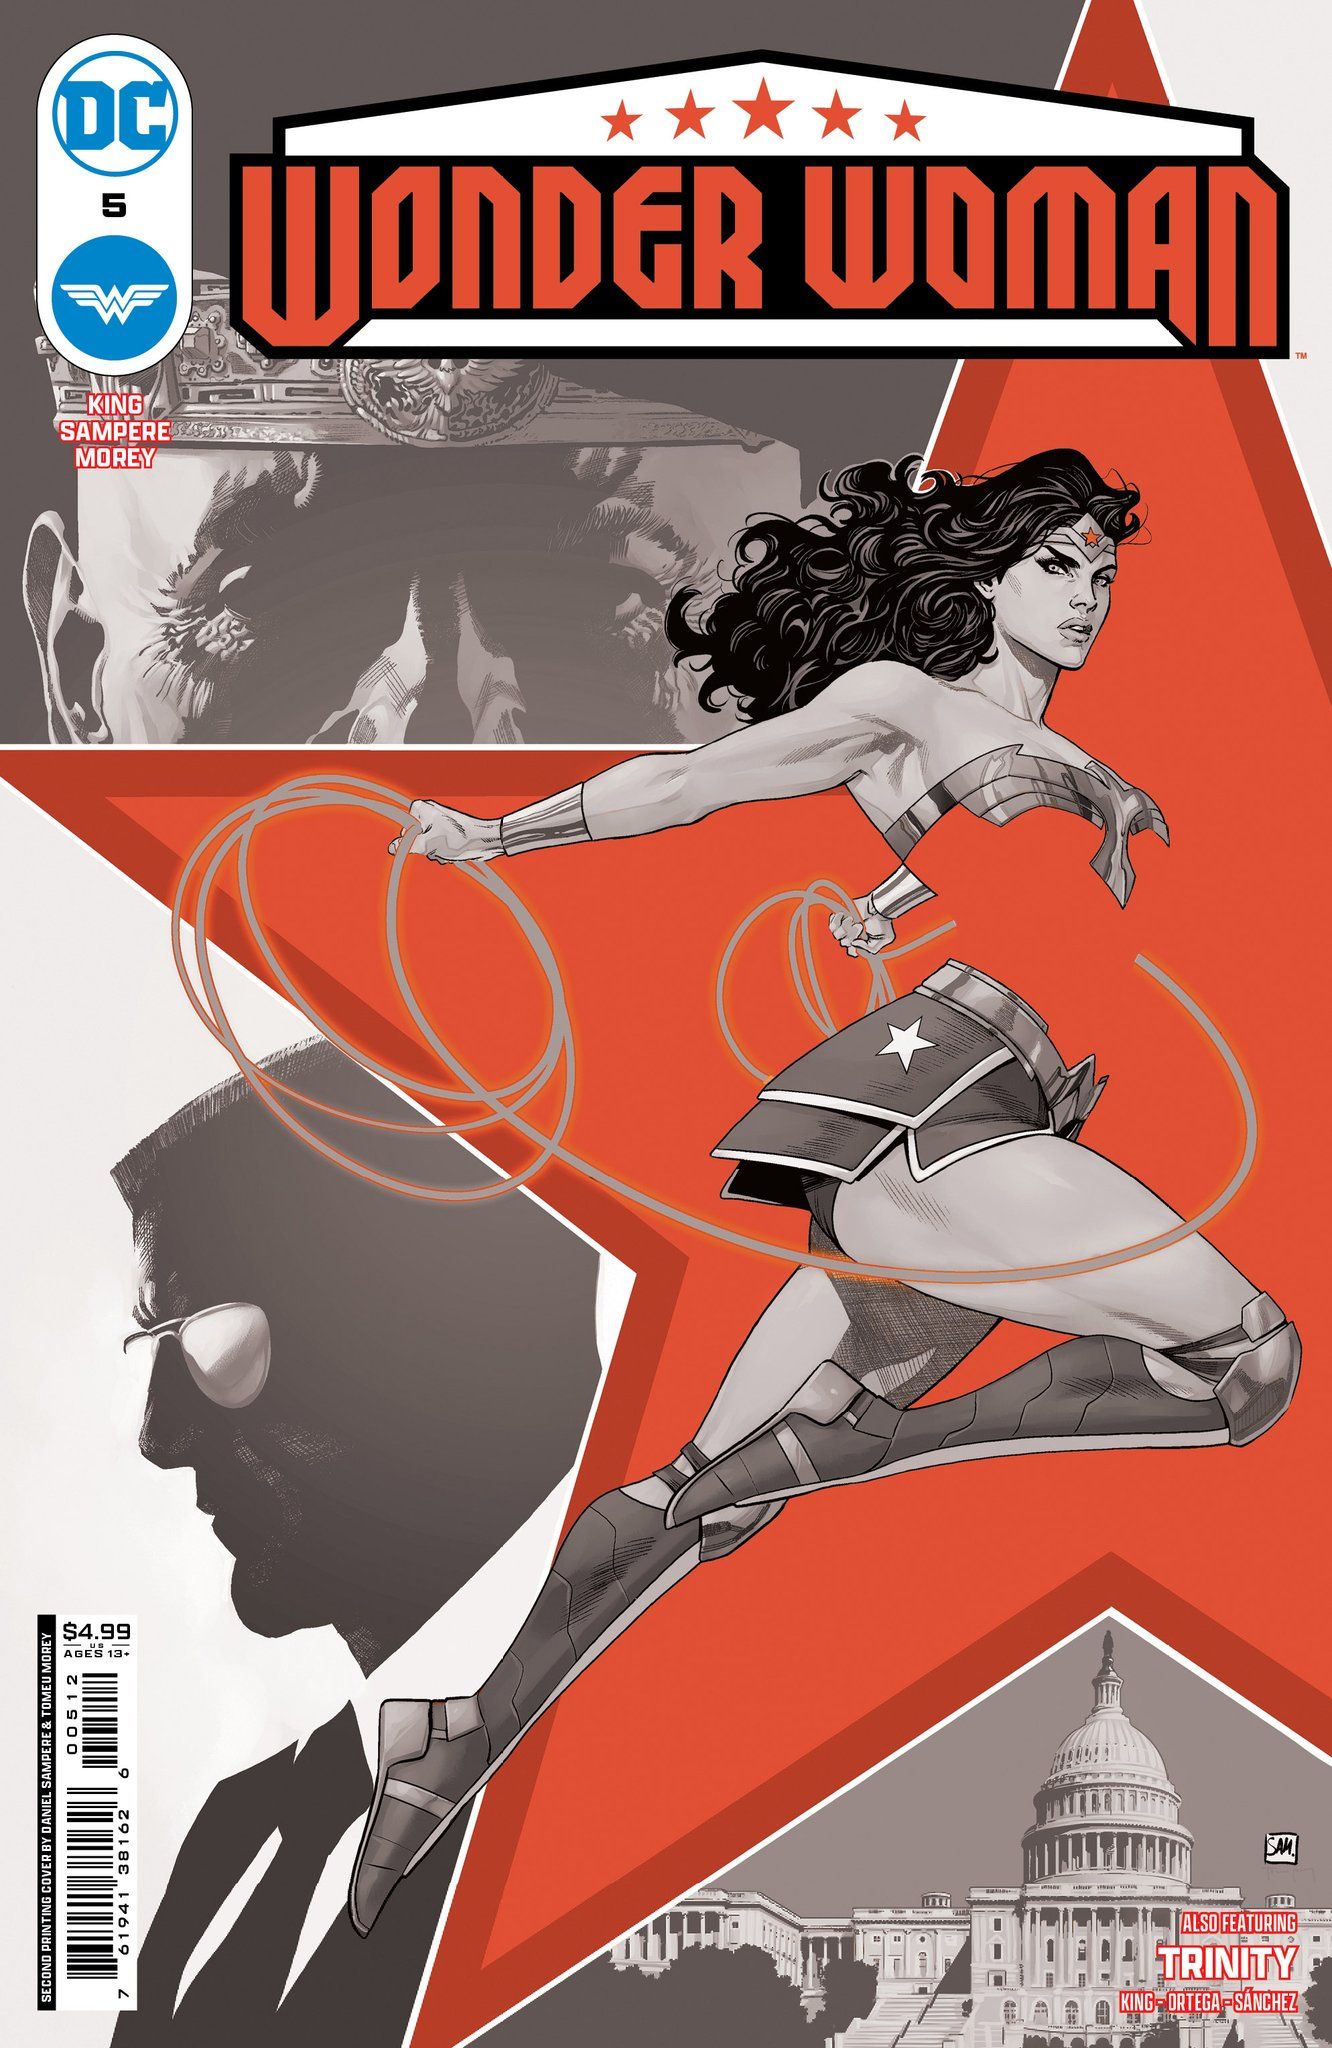 Wonder Woman #5 Variant Cover for second printing